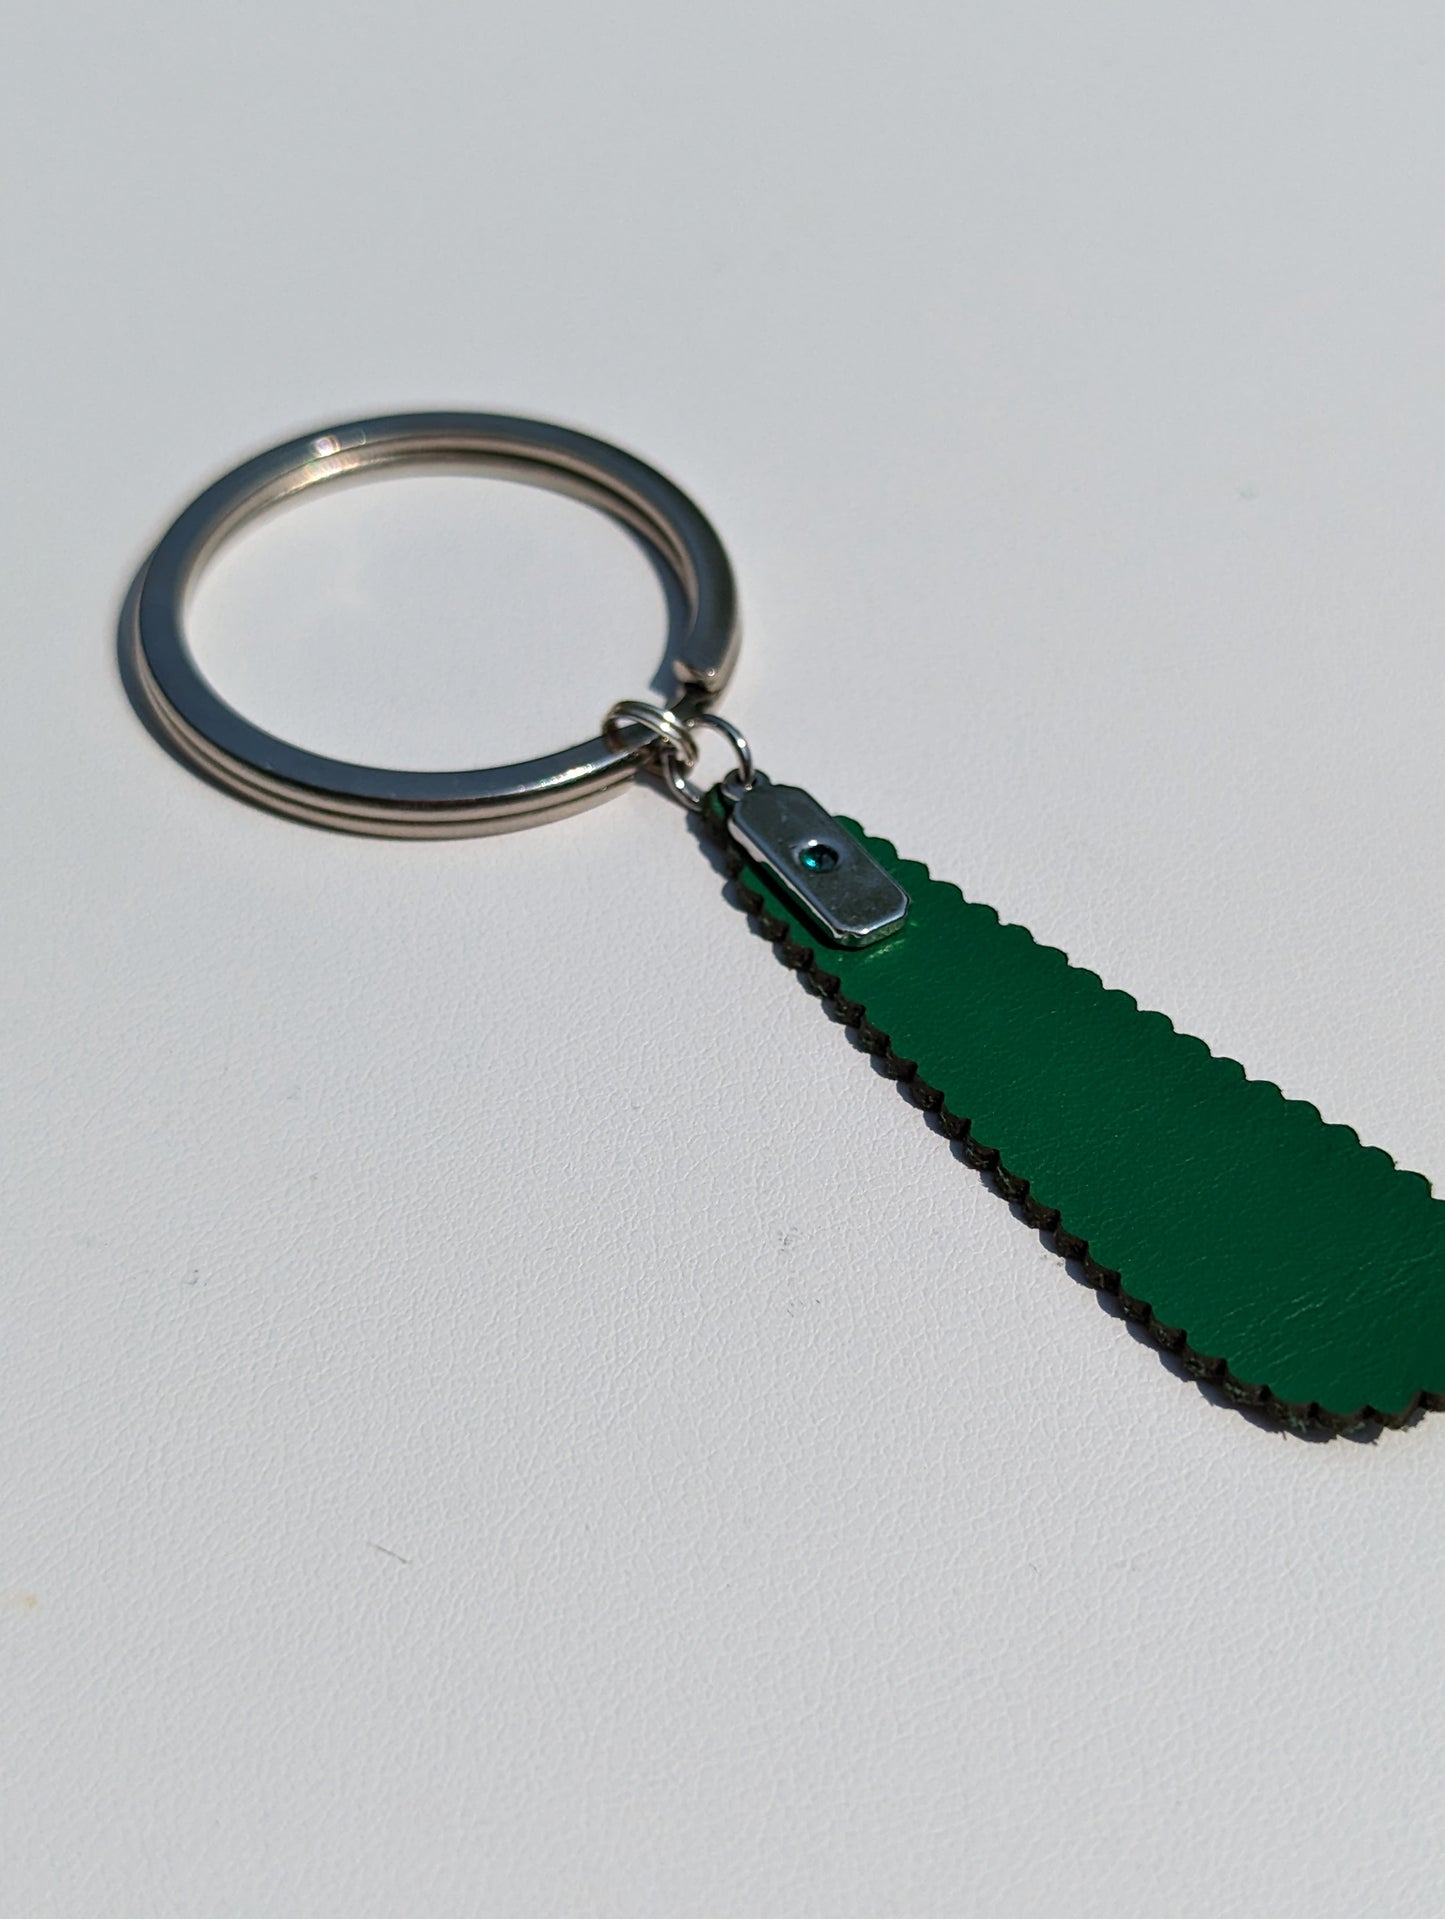 Keyring with Green Leather Teardrop